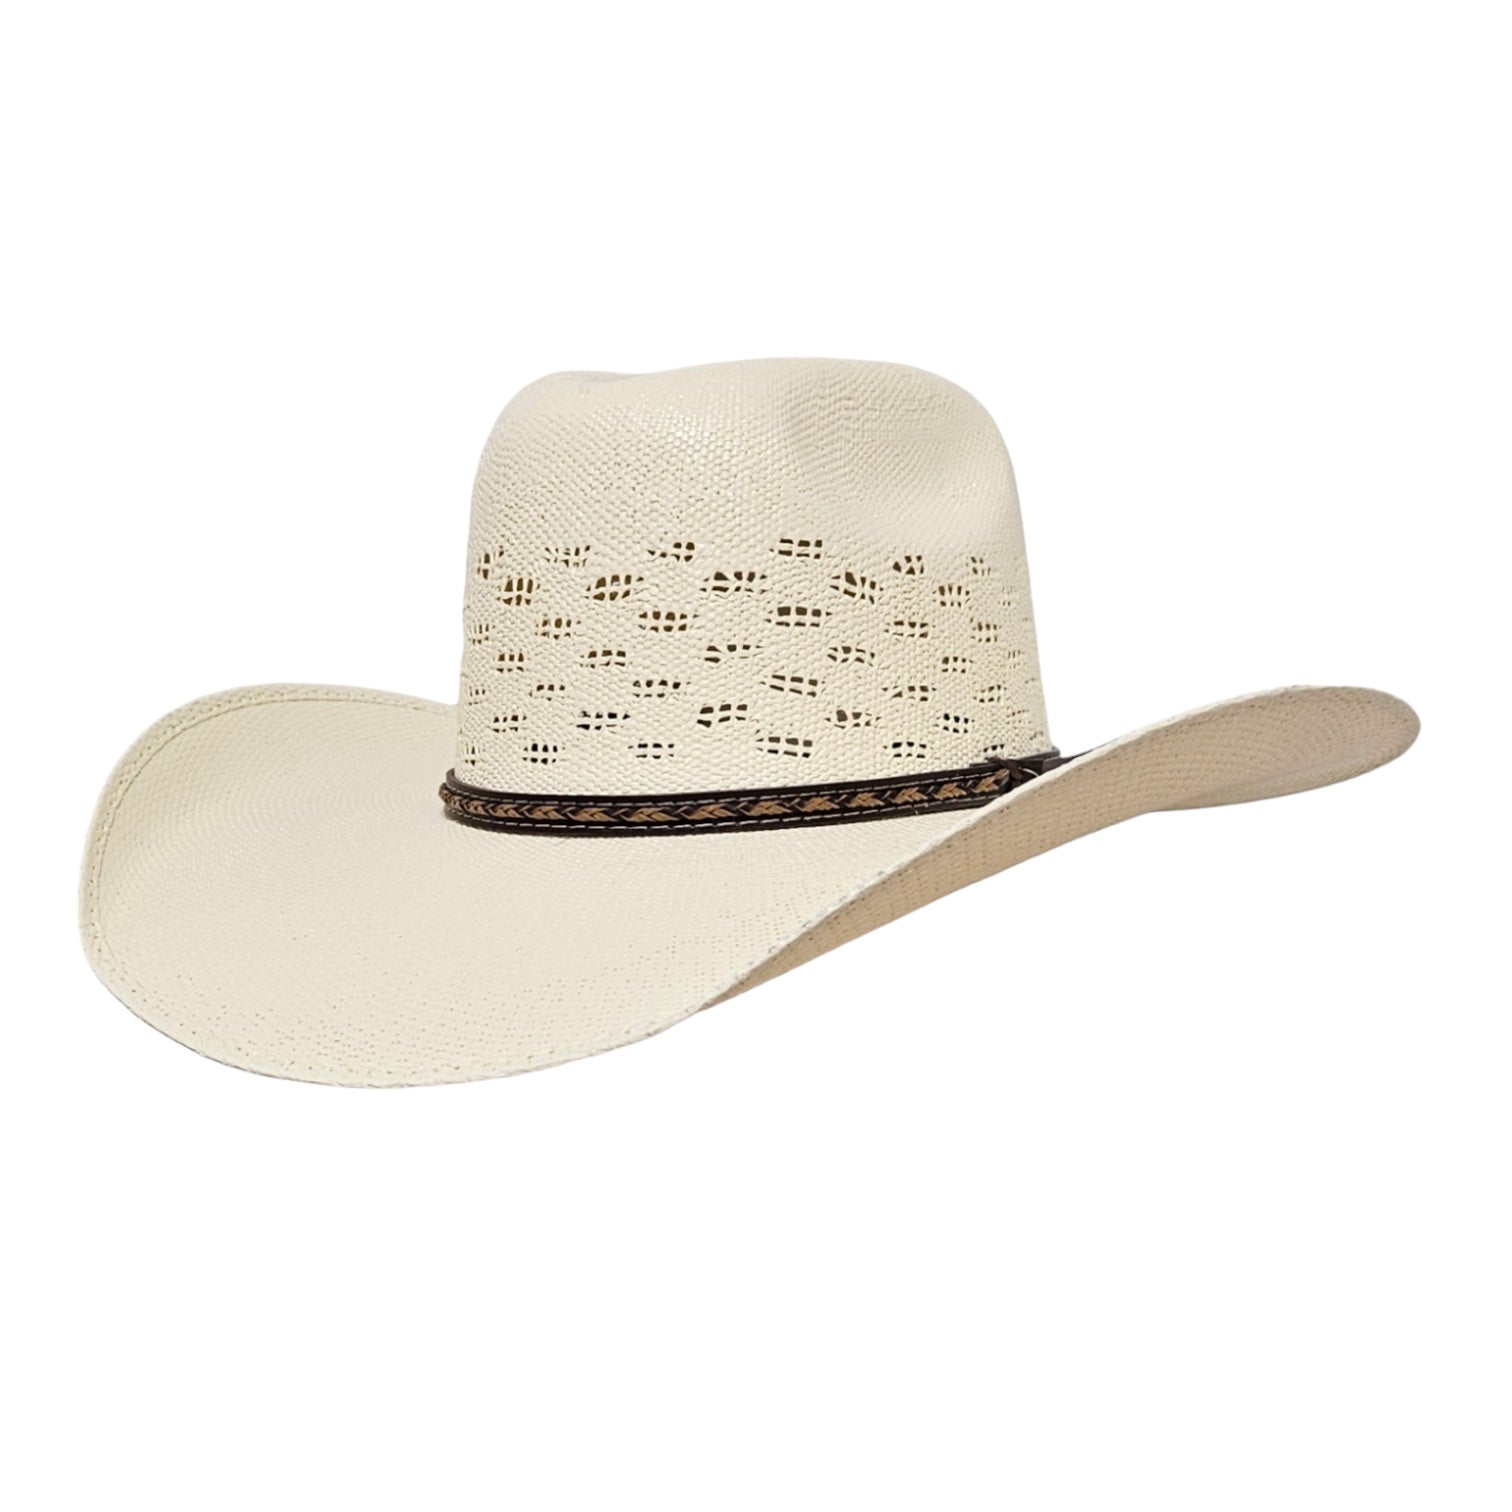 Gone Country Hats Men & Women's Hats Small 6-3/4 to 7 Big Sky Natural - Straw Bangora